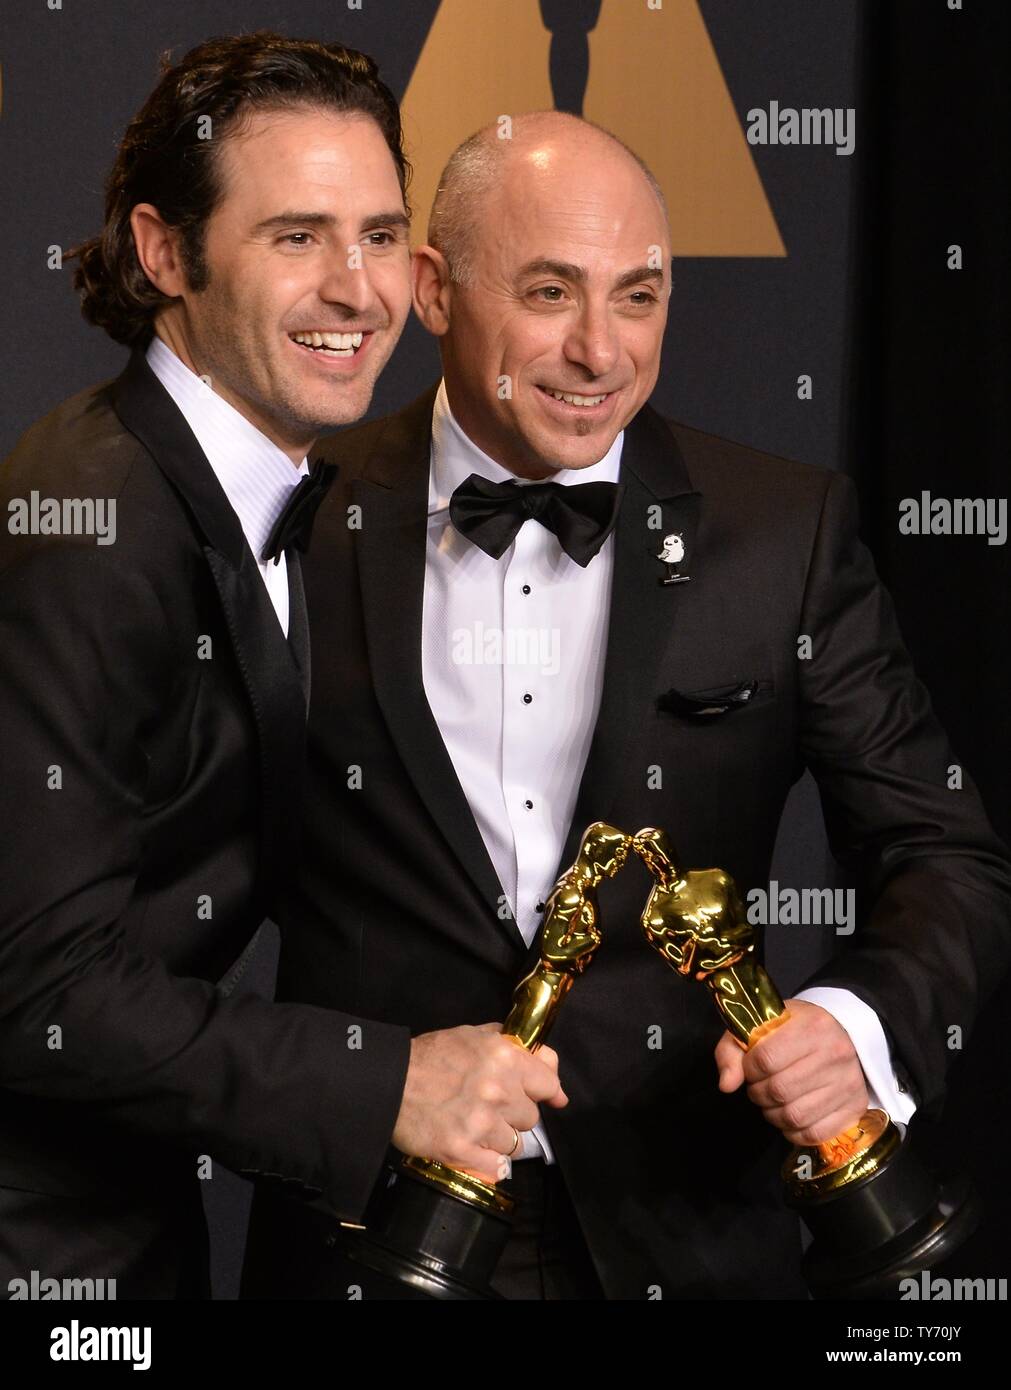 Director Alan Barillaro (L) and producer Marc Sondheimer, winners of the  award for Short Film (Animated) for 'Piper', appear backstage during the  89th annual Academy Awards at Loews Hollywood Hotel in the